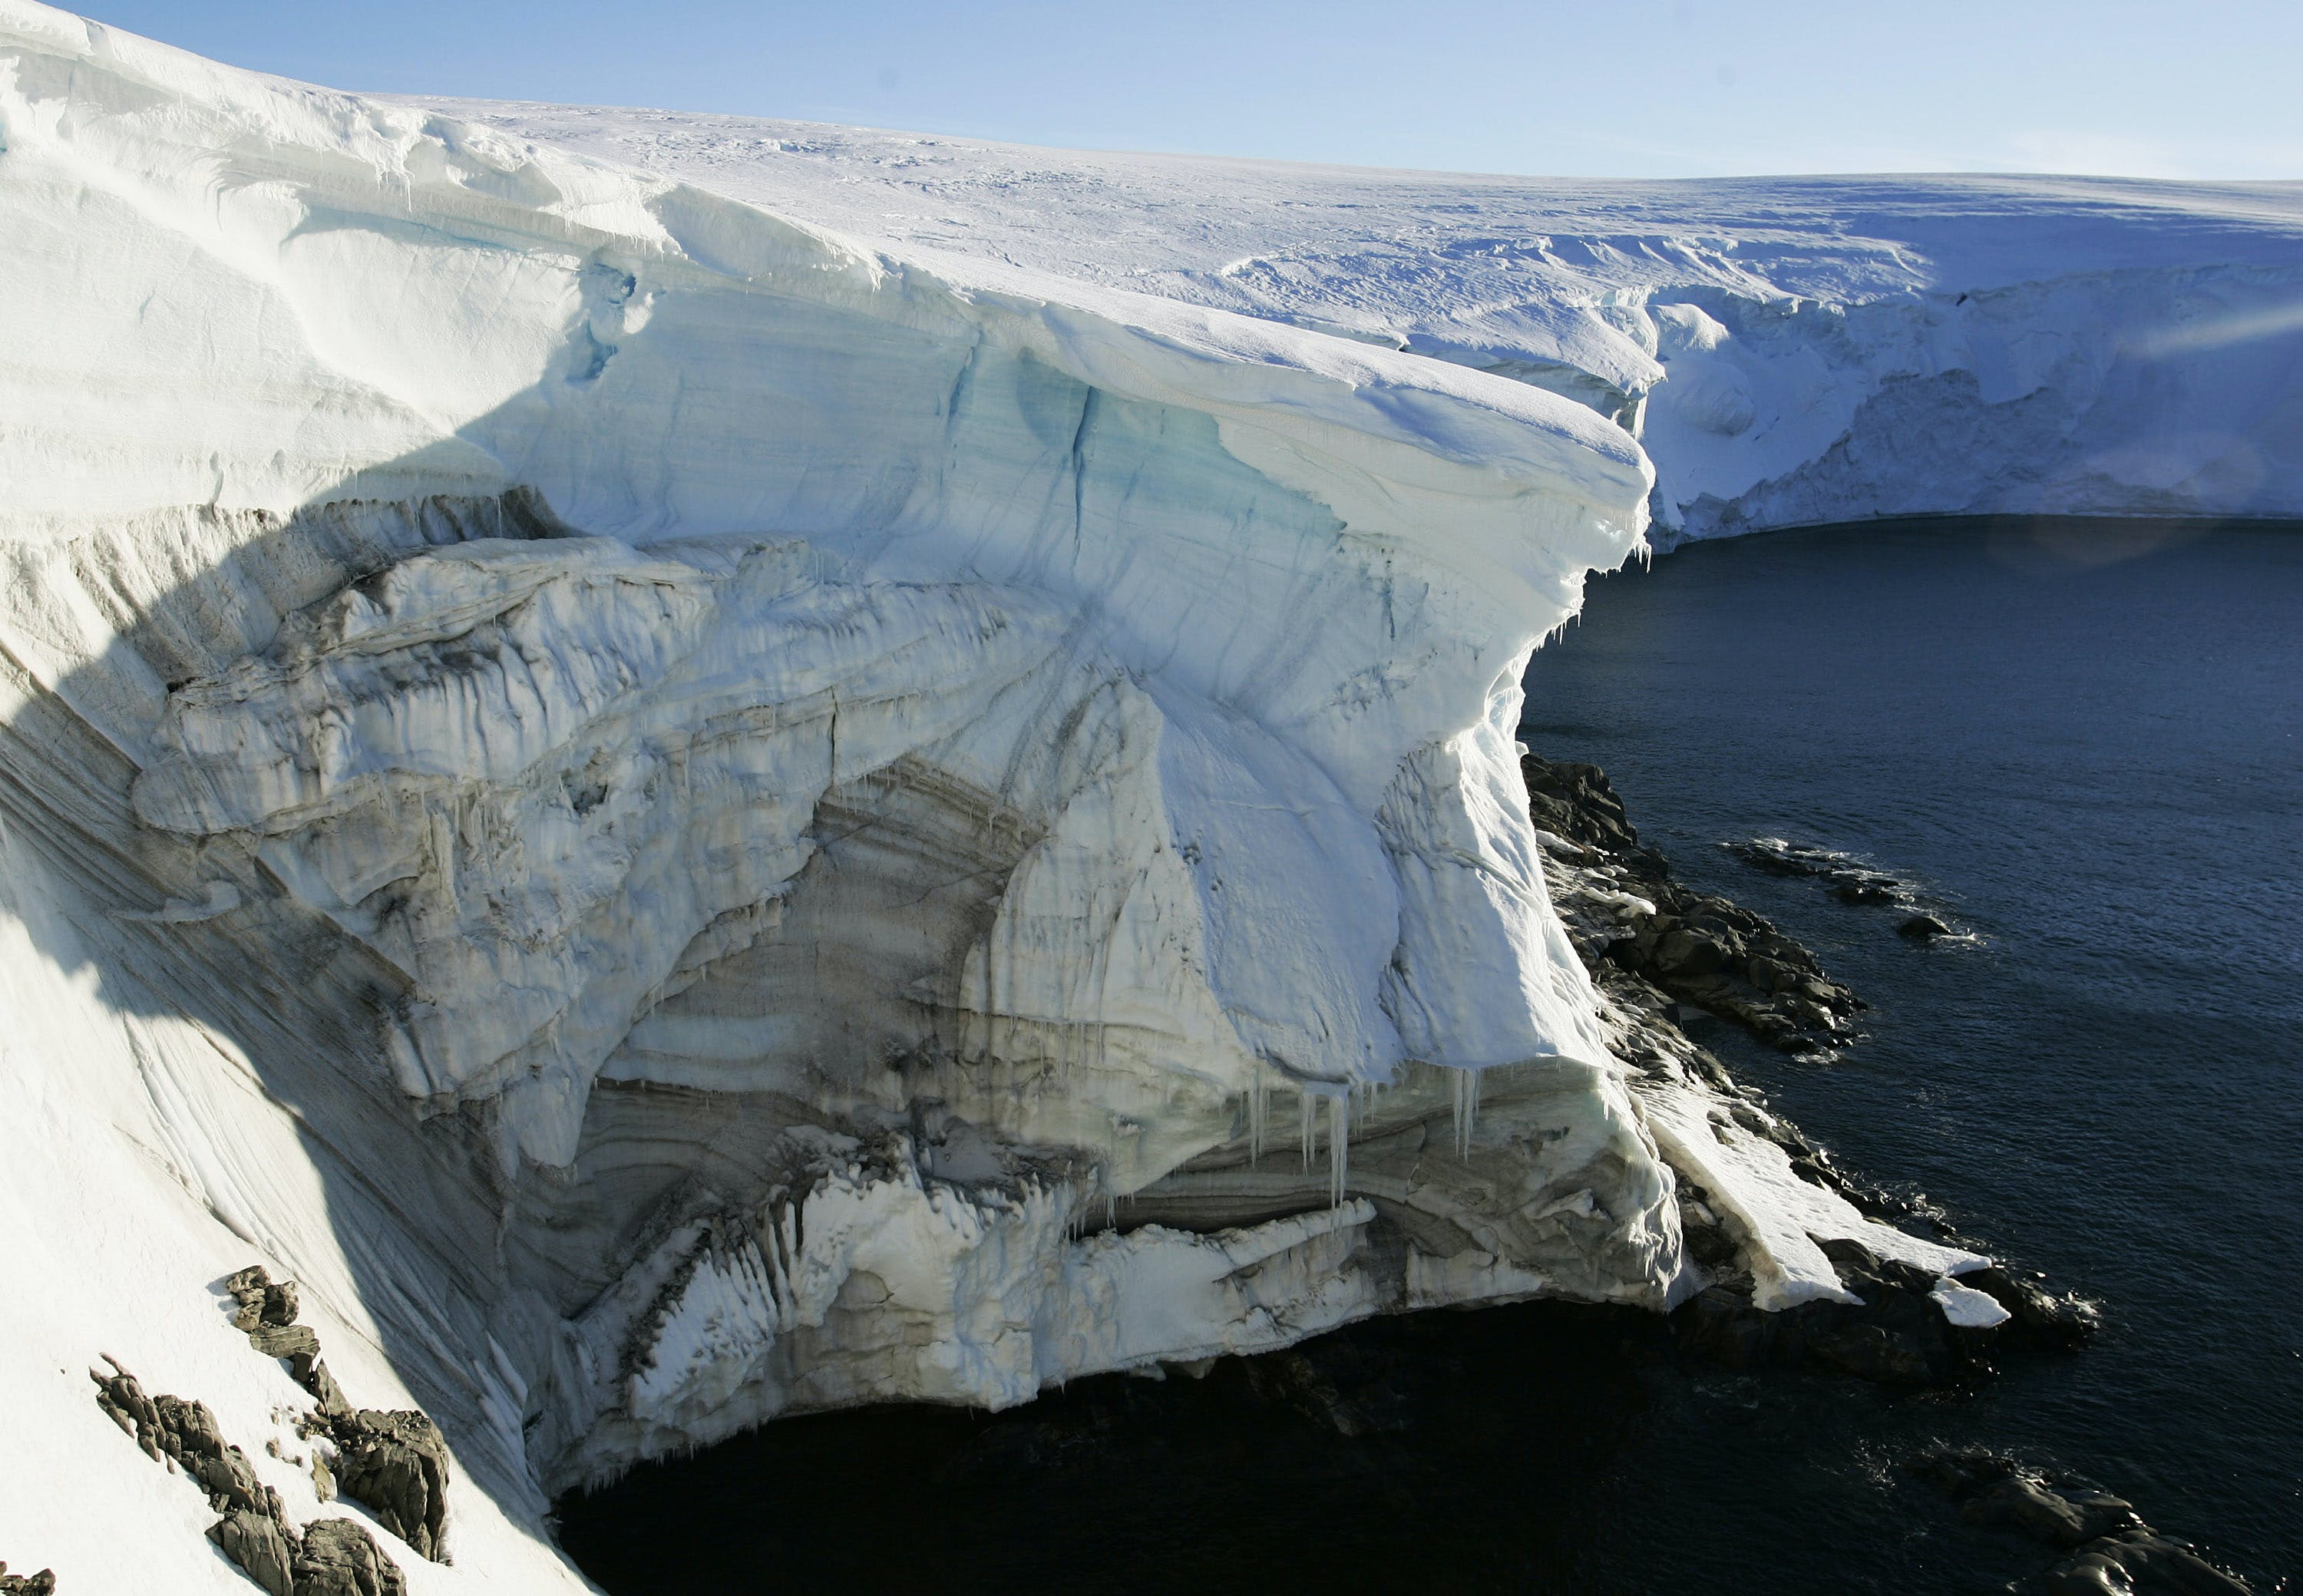 Melting ice shows through at a cliff face at Landsend, on the coast of Cape Denison in Antarctica